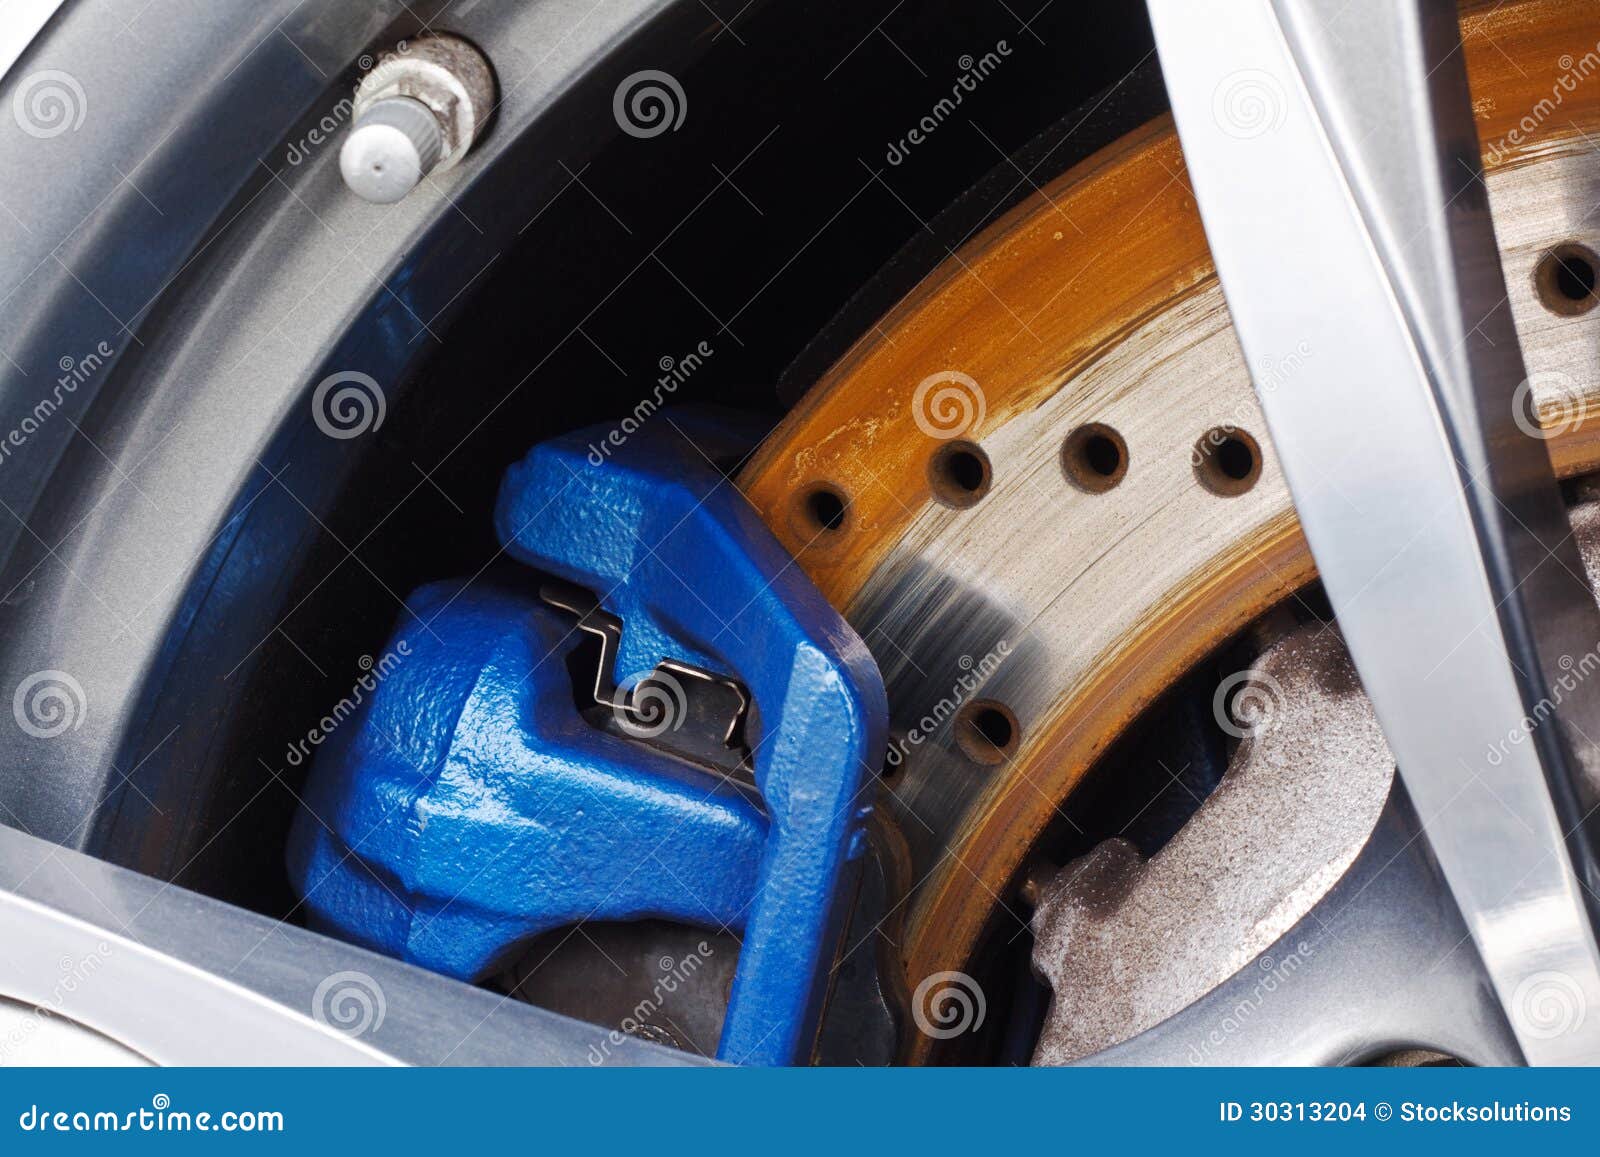 clipart of car brakes - photo #34